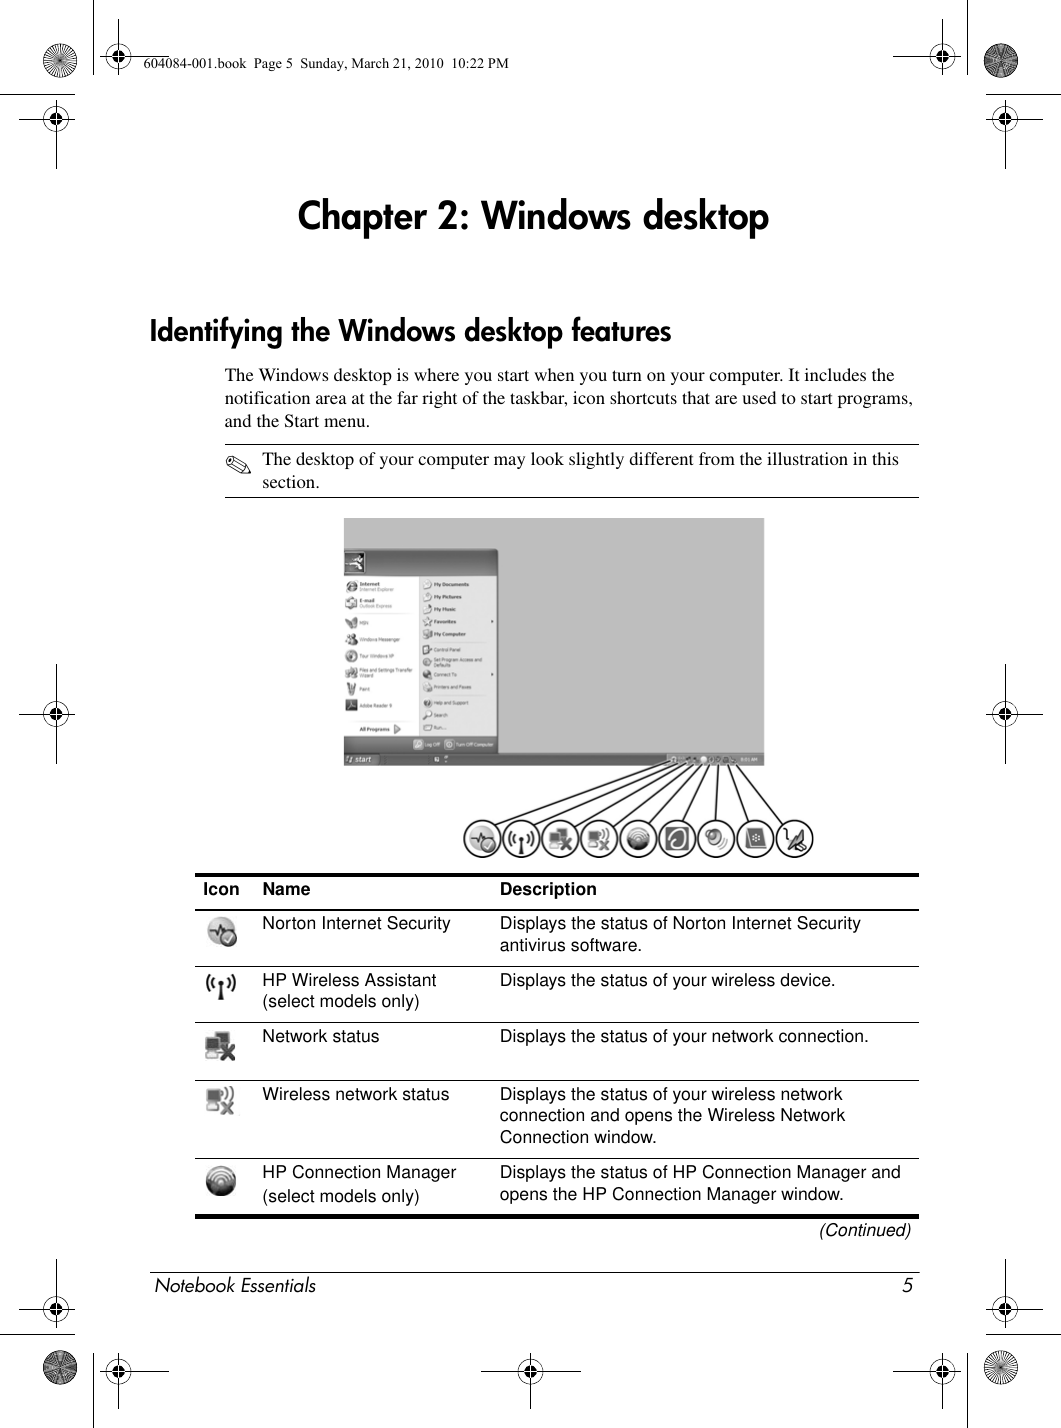 Notebook Essentials 5Chapter 2: Windows desktopThe Windows desktop is where you start when you turn on your computer. It includes the notification area at the far right of the taskbar, icon shortcuts that are used to start programs, and the Start menu.✎The desktop of your computer may look slightly different from the illustration in this section.Identifying the Windows desktop featuresIcon Name DescriptionNorton Internet Security Displays the status of Norton Internet Security antivirus software.HP Wireless Assistant (select models only)Displays the status of your wireless device. Network status Displays the status of your network connection. Wireless network status Displays the status of your wireless network connection and opens the Wireless Network Connection window.HP Connection Manager(select models only)Displays the status of HP Connection Manager and opens the HP Connection Manager window.(Continued)604084-001.book  Page 5  Sunday, March 21, 2010  10:22 PM